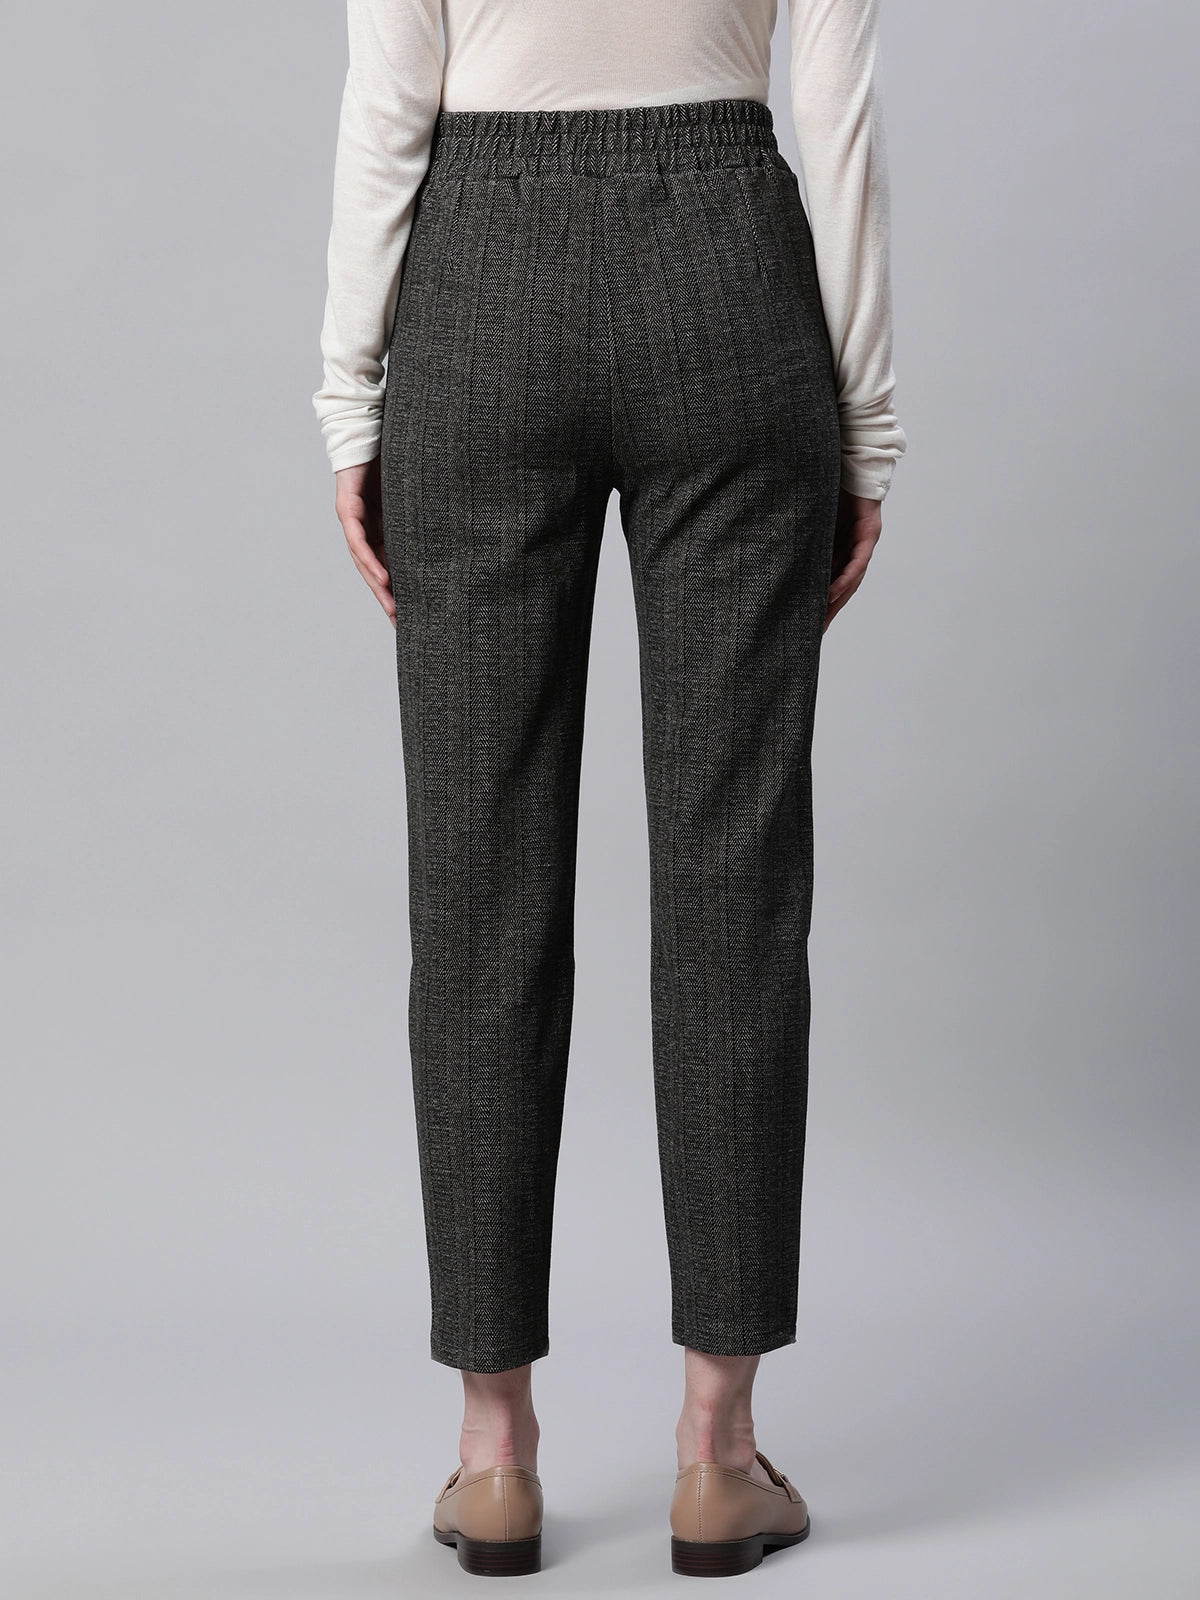 DeFacto Trousers outlet  Women  1800 products on sale  FASHIOLAcouk